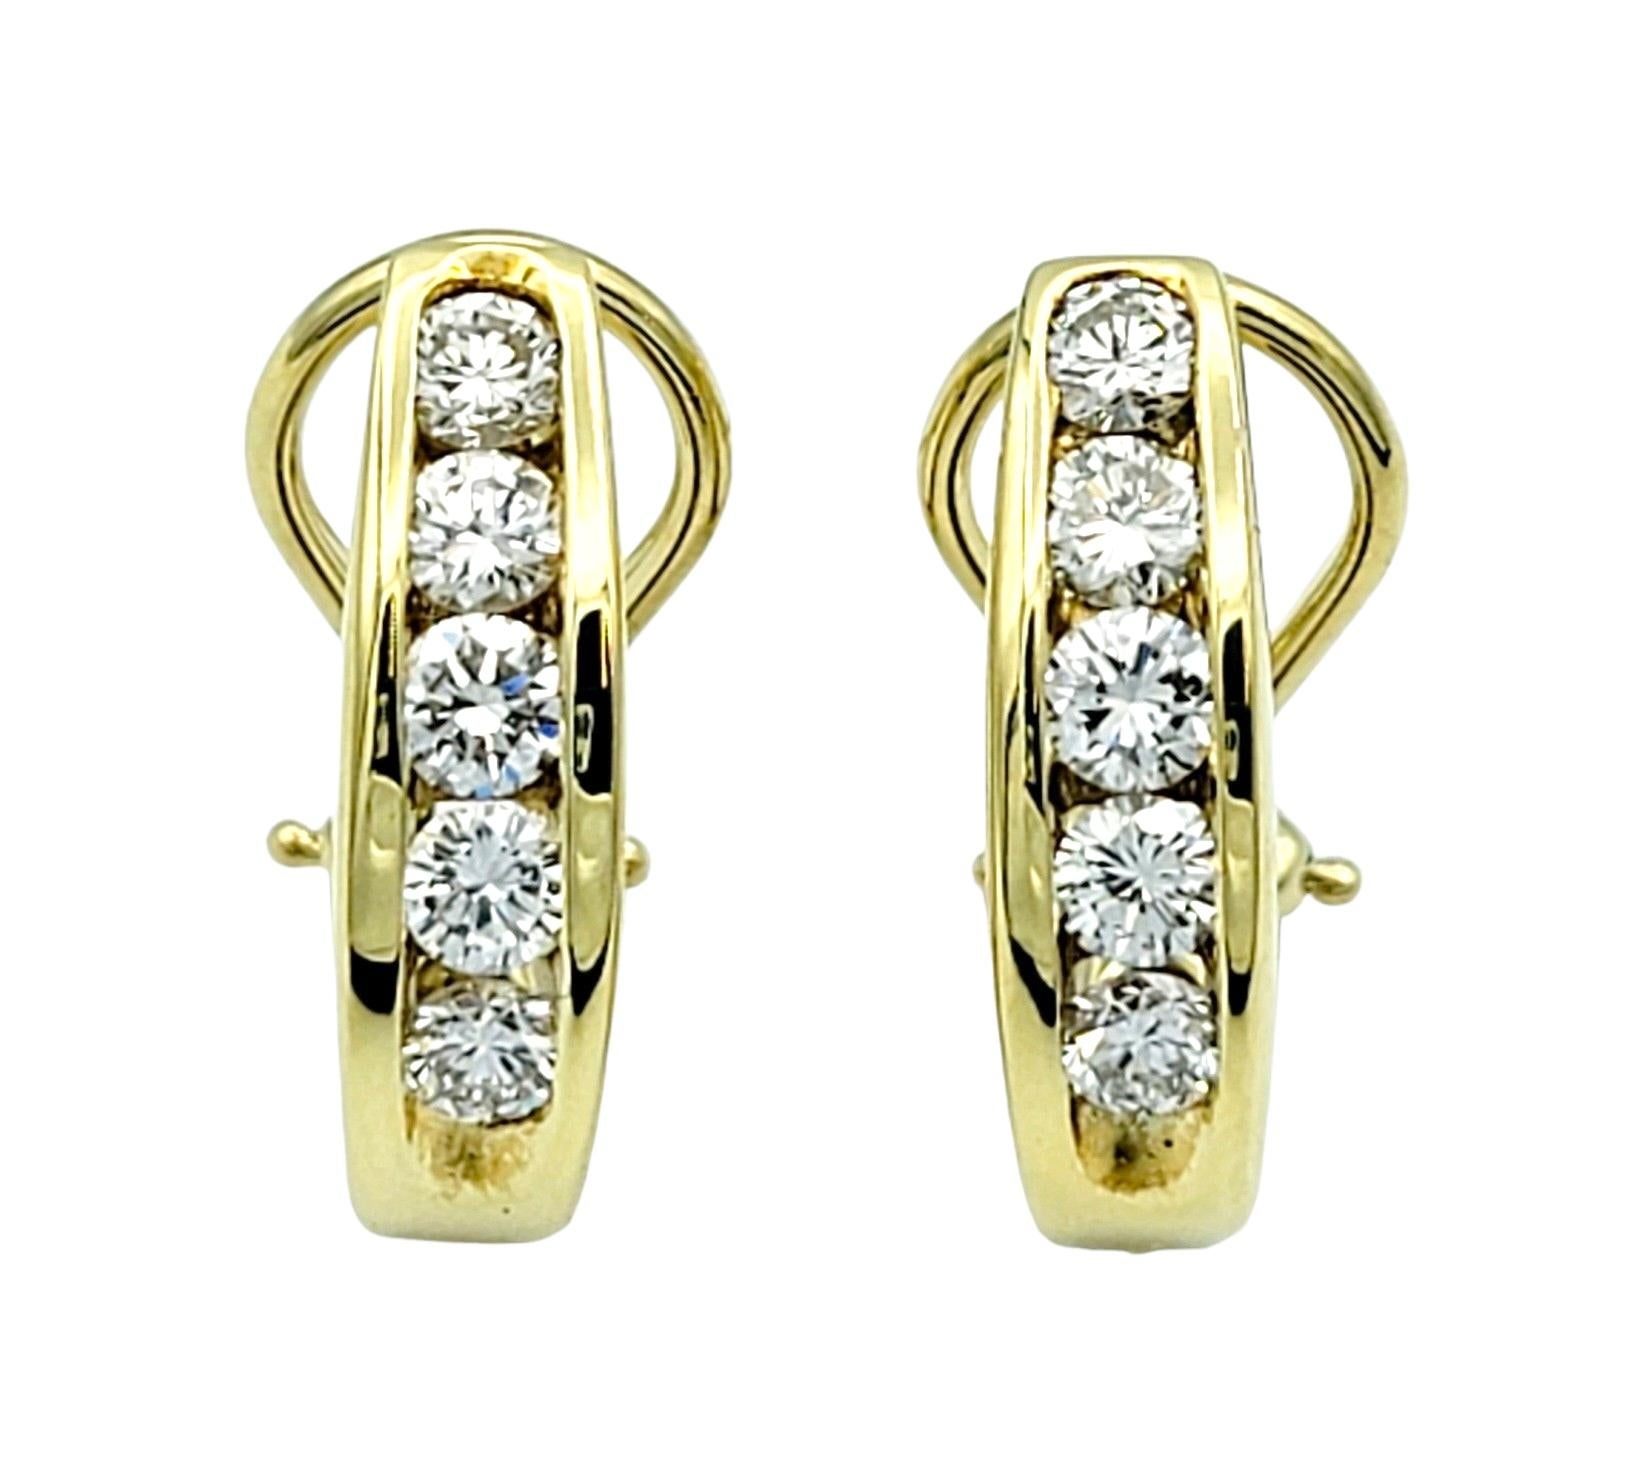 Simple yet stunning 18 karat yellow gold and diamond half hoop earrings. We love the striking contrast of the icy white diamonds against the golden hue of the precious metal, allowing the diamonds to really pop!

These gorgeous earrings feature a